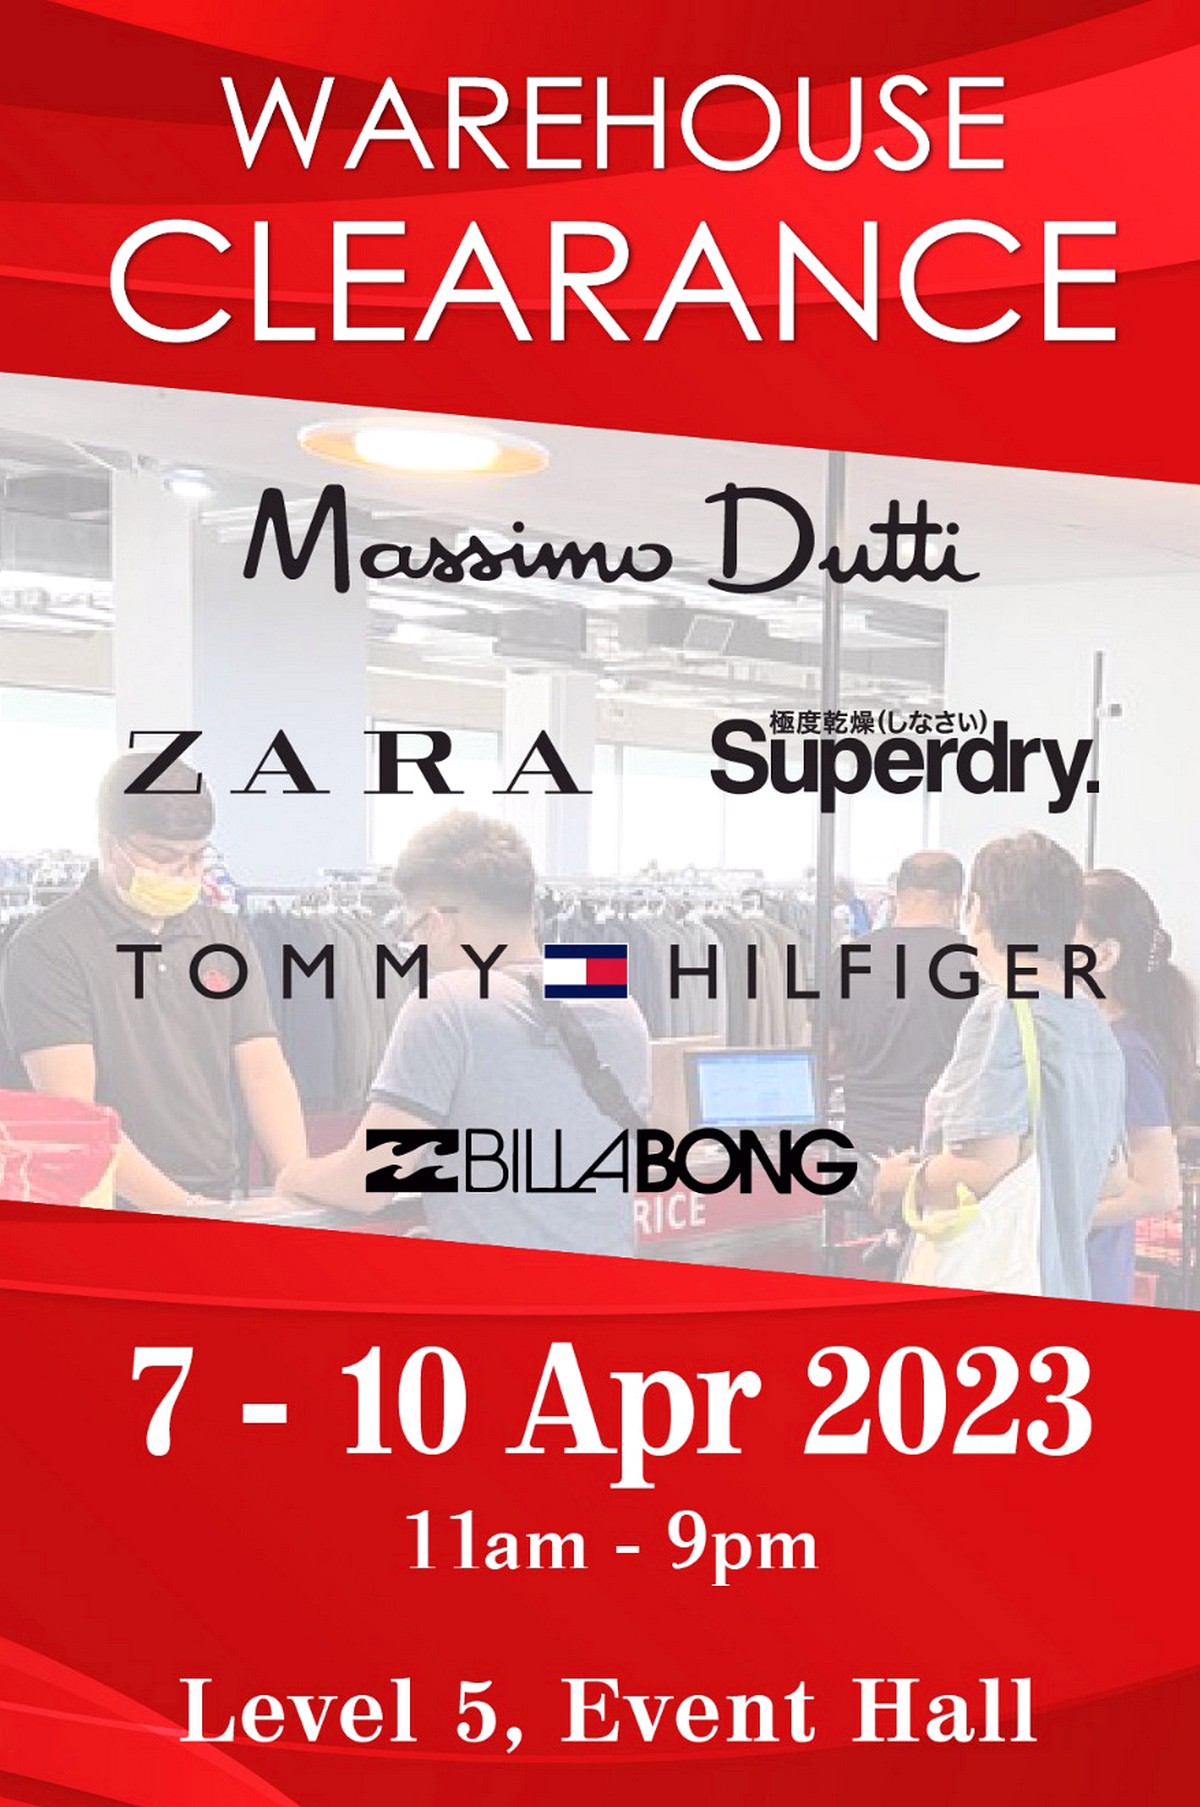 The-Starling-Mall-Warehouse-Sale-Branded-Clearance-2023-Malaysia-Jualan-Gudang-Zara-Levis-Superdry-Massimo-Dutti-Billabong-Tommy-Hilfiger - Apparels Baby & Kids & Toys Children Fashion Fashion Accessories Fashion Lifestyle & Department Store Footwear Kuala Lumpur Selangor Warehouse Sale & Clearance in Malaysia 